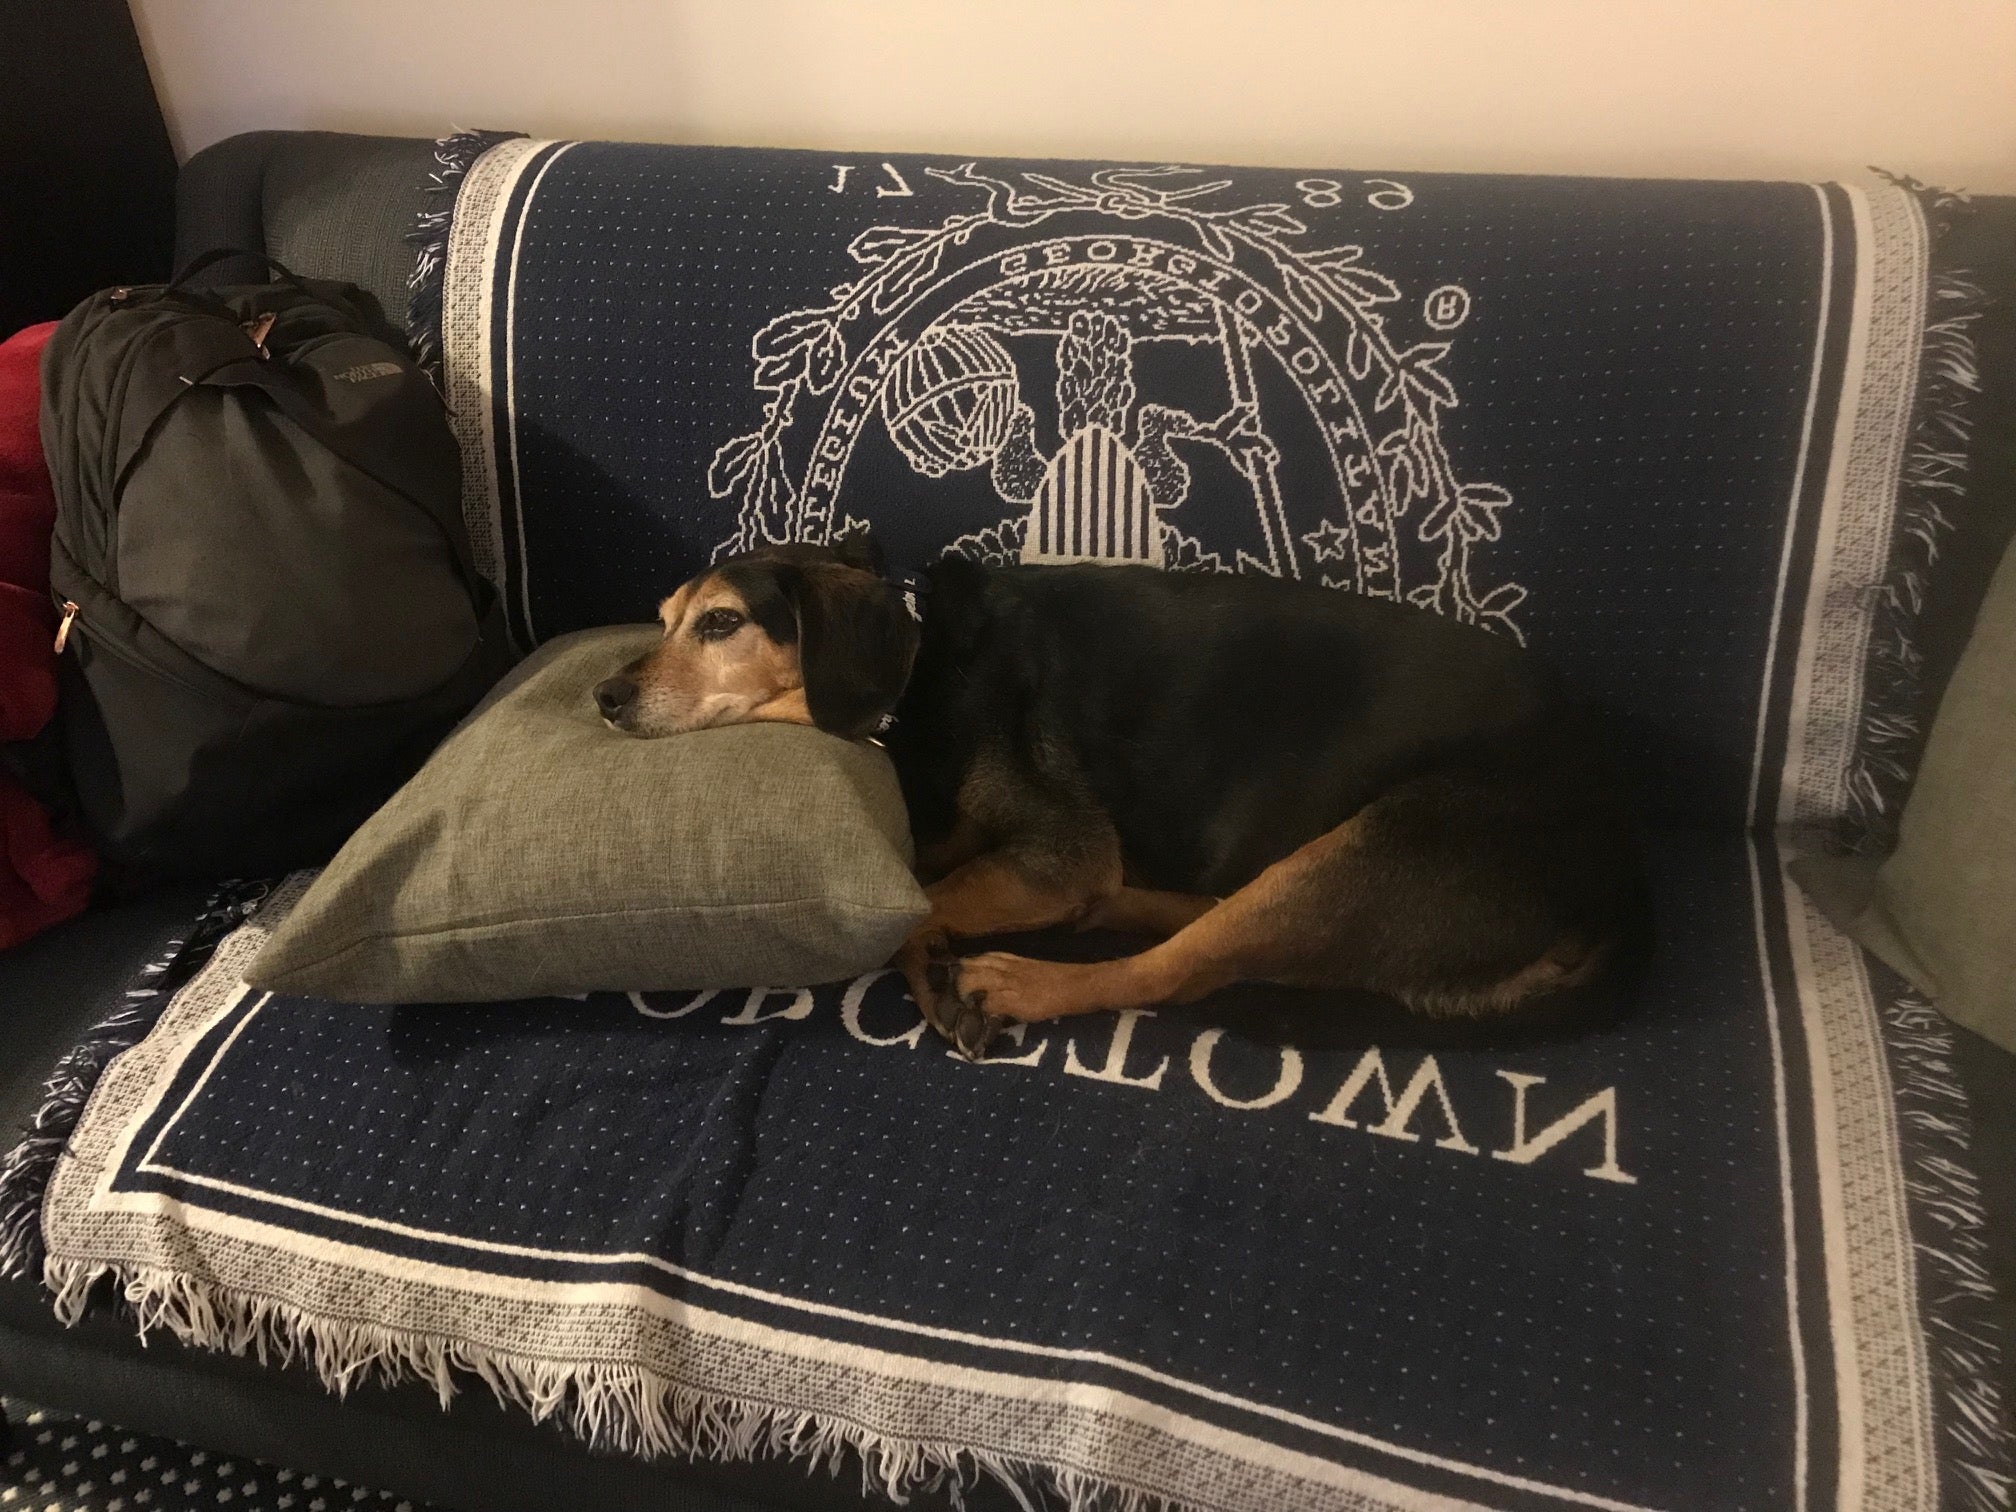 Dog sleeps on couch with a Georgetown blanket